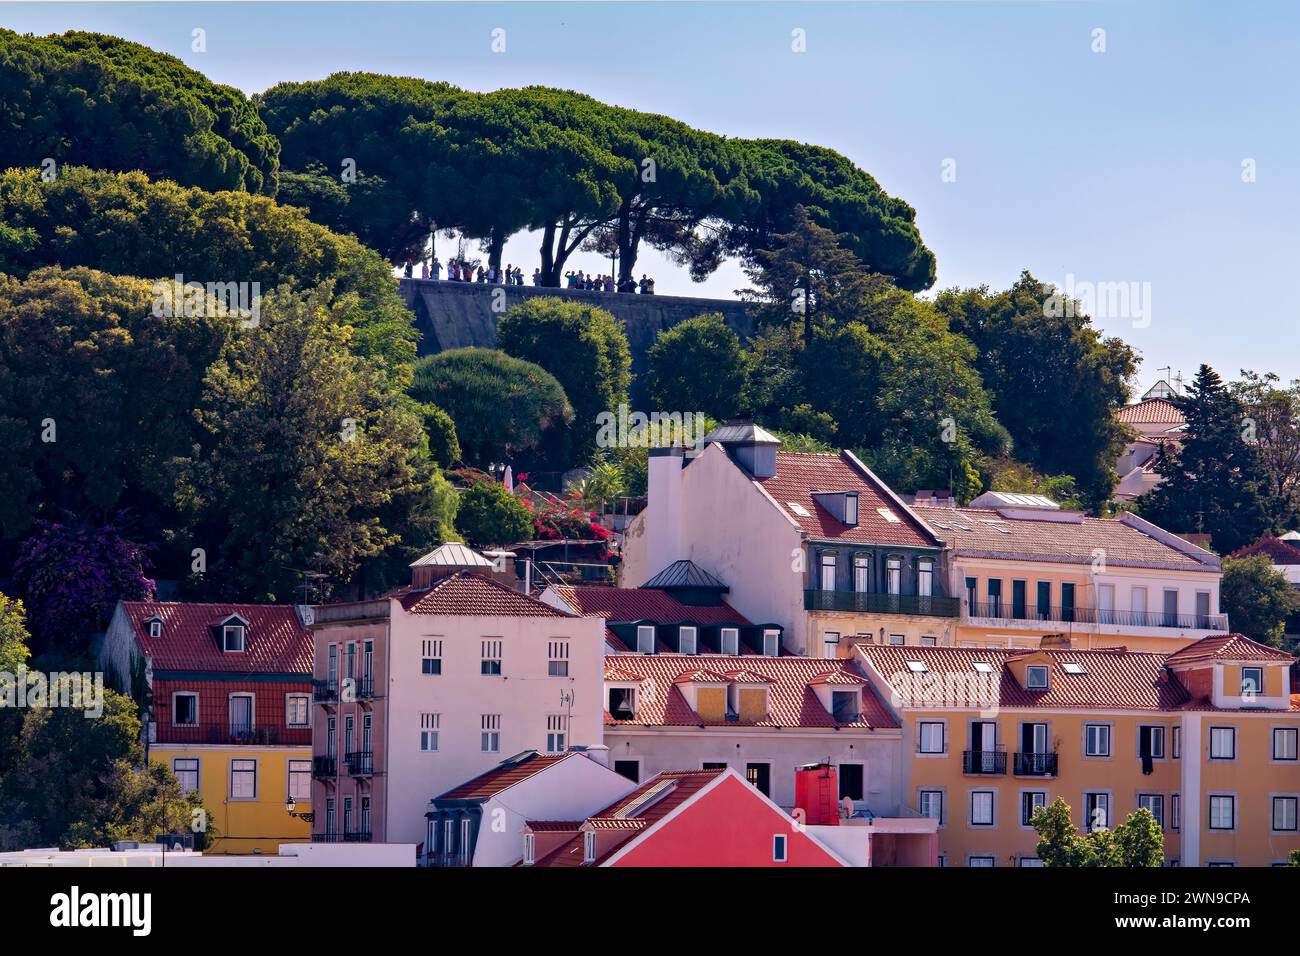 Colorful buildings under a canopy of green trees against a blue sky, Lisbon Stock Photo